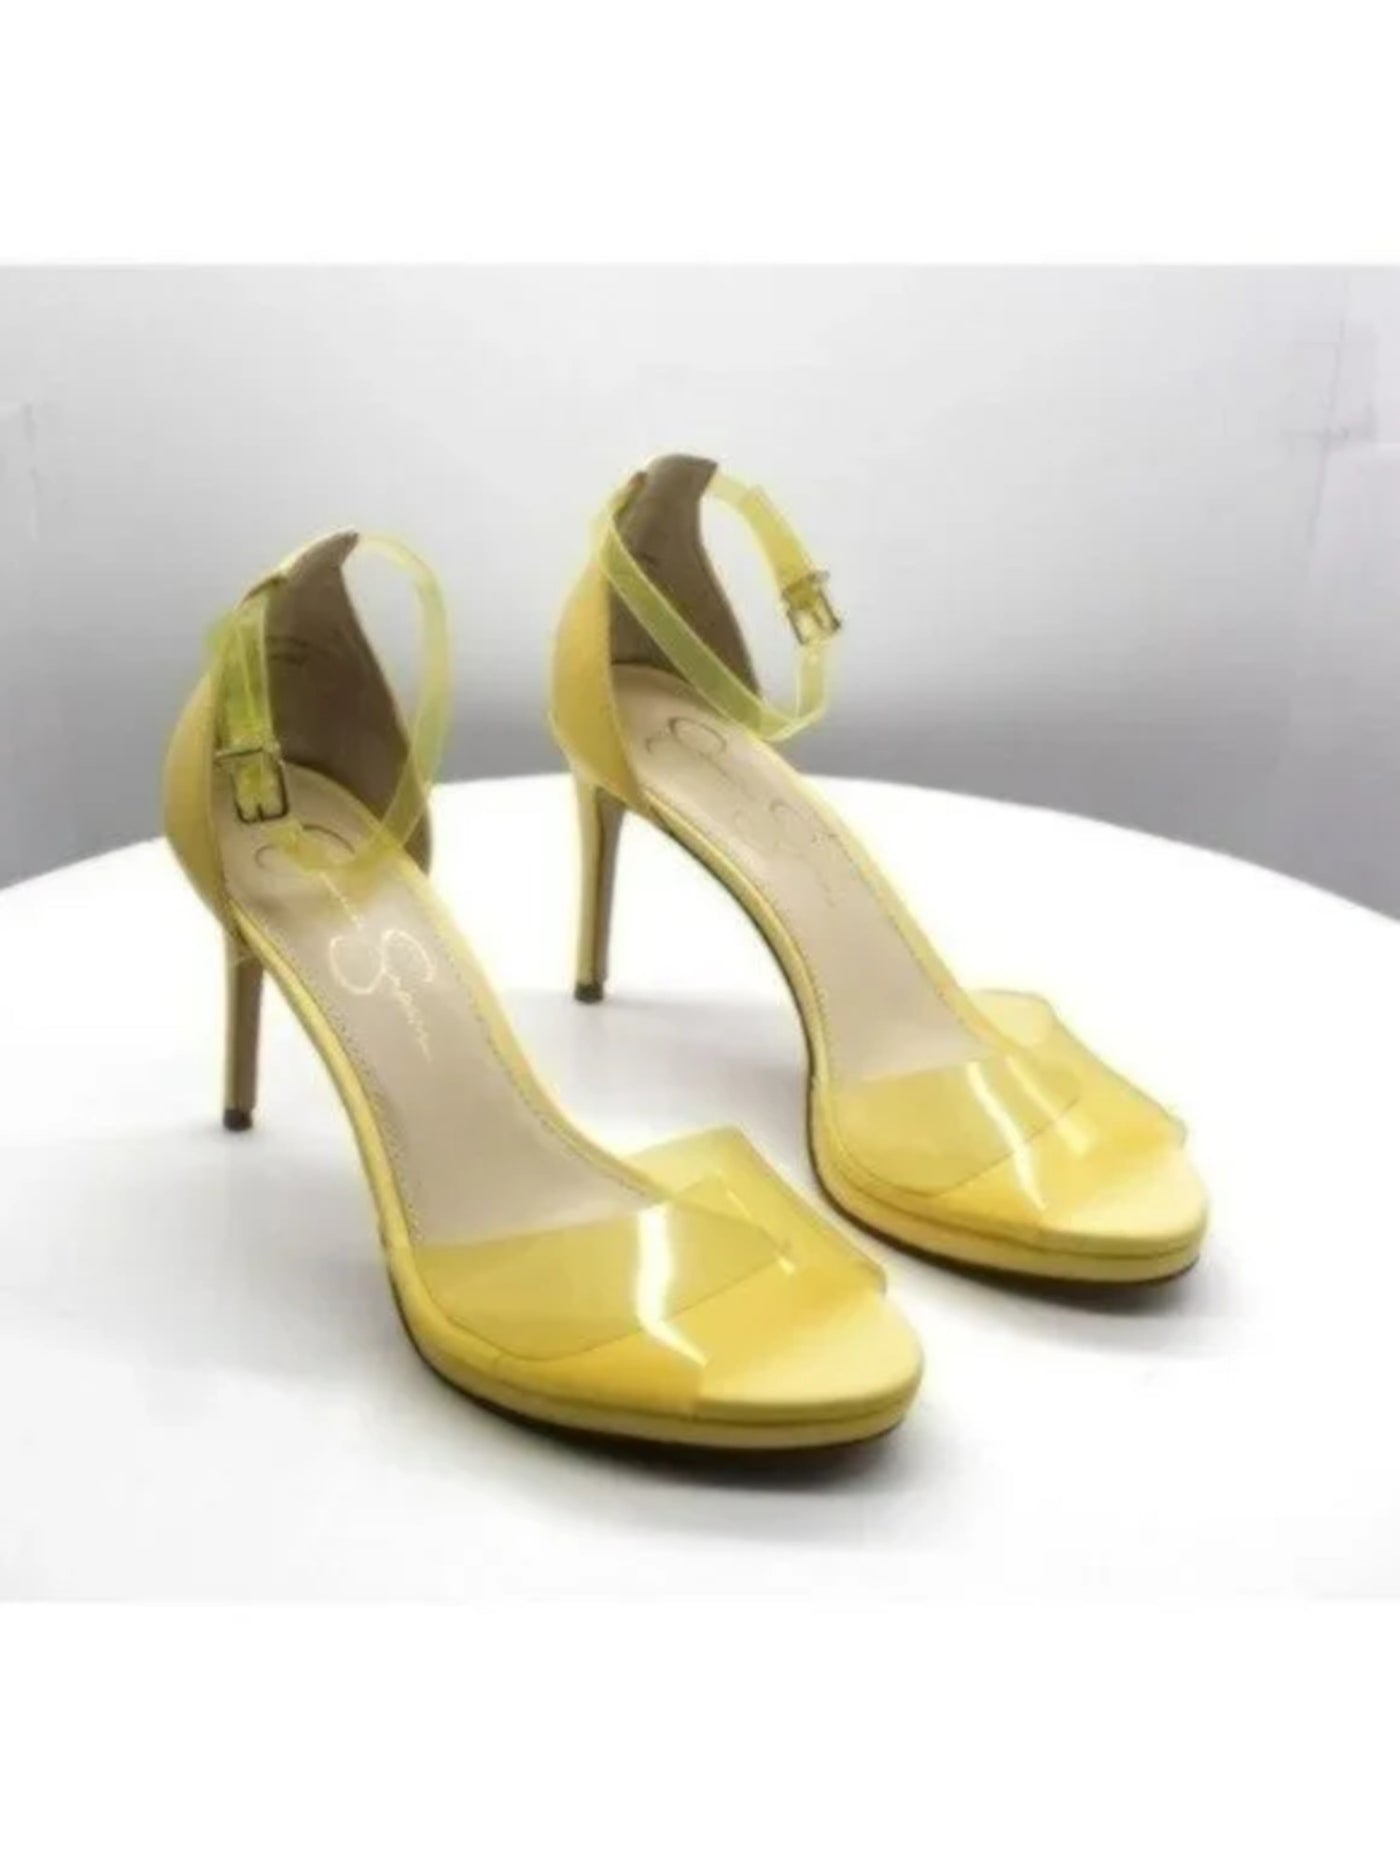 JESSICA SIMPSON Womens Yellow Translucent Ankle Strap Padded Daisile Round Toe Stiletto Buckle Heeled Sandal 6.5 M